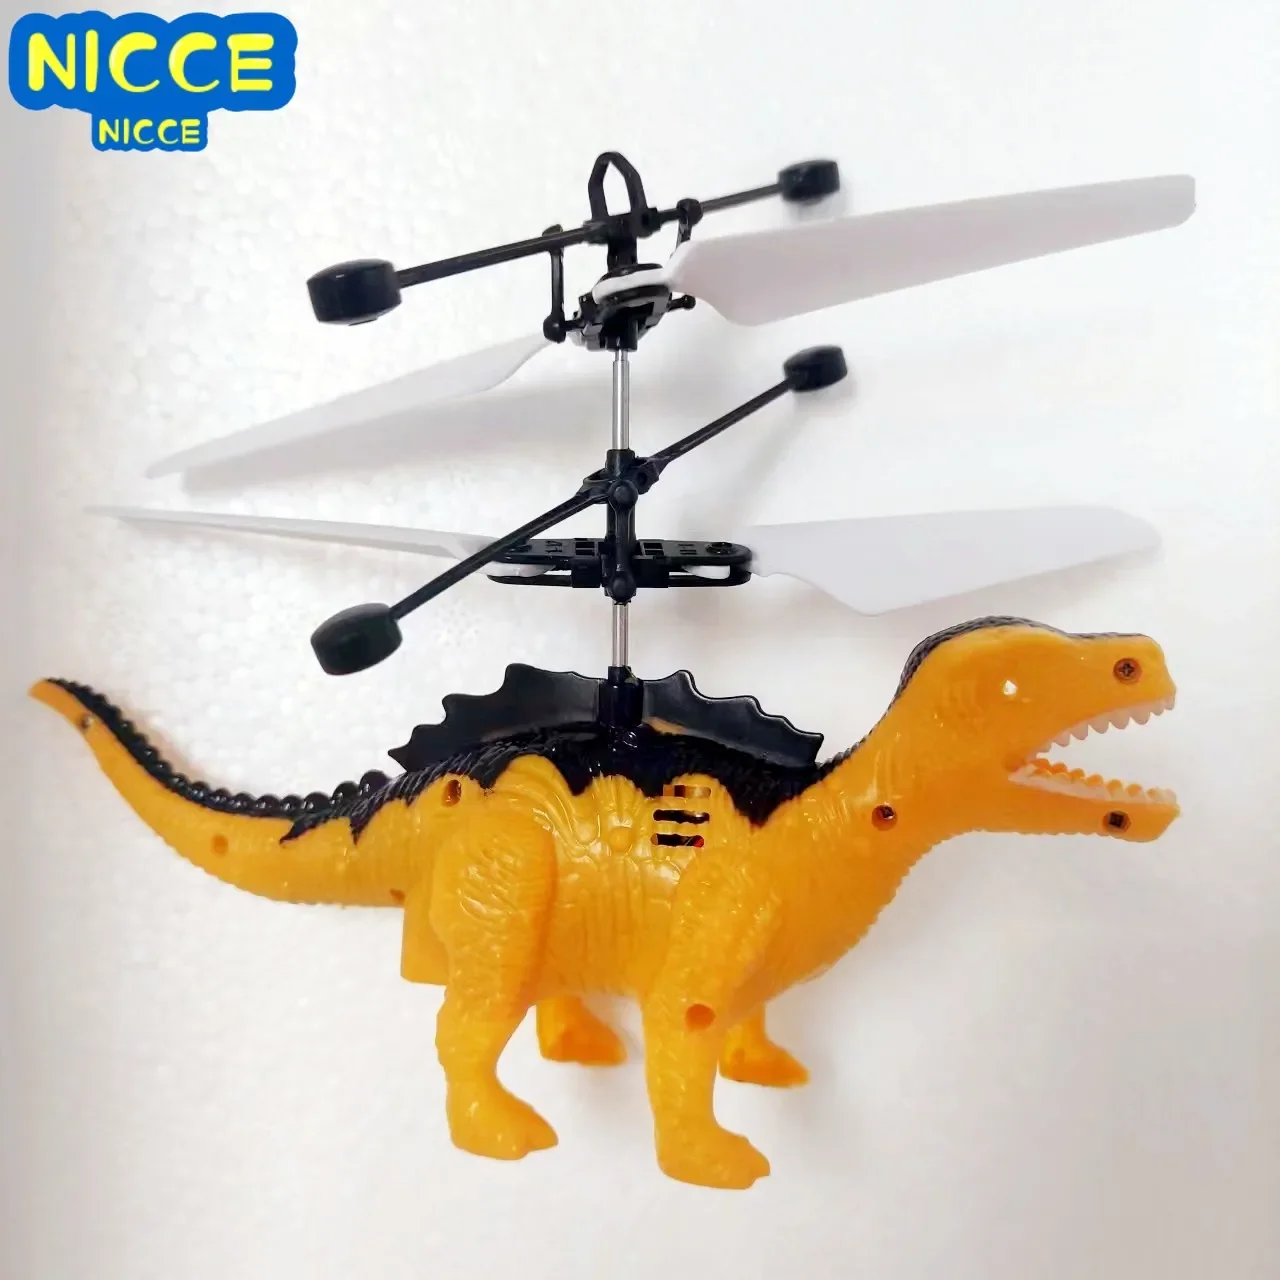 Nicce Mini Drone RC Drone Helicopter Infrared Induction Flying Quadcopter Dolls - £11.33 GBP